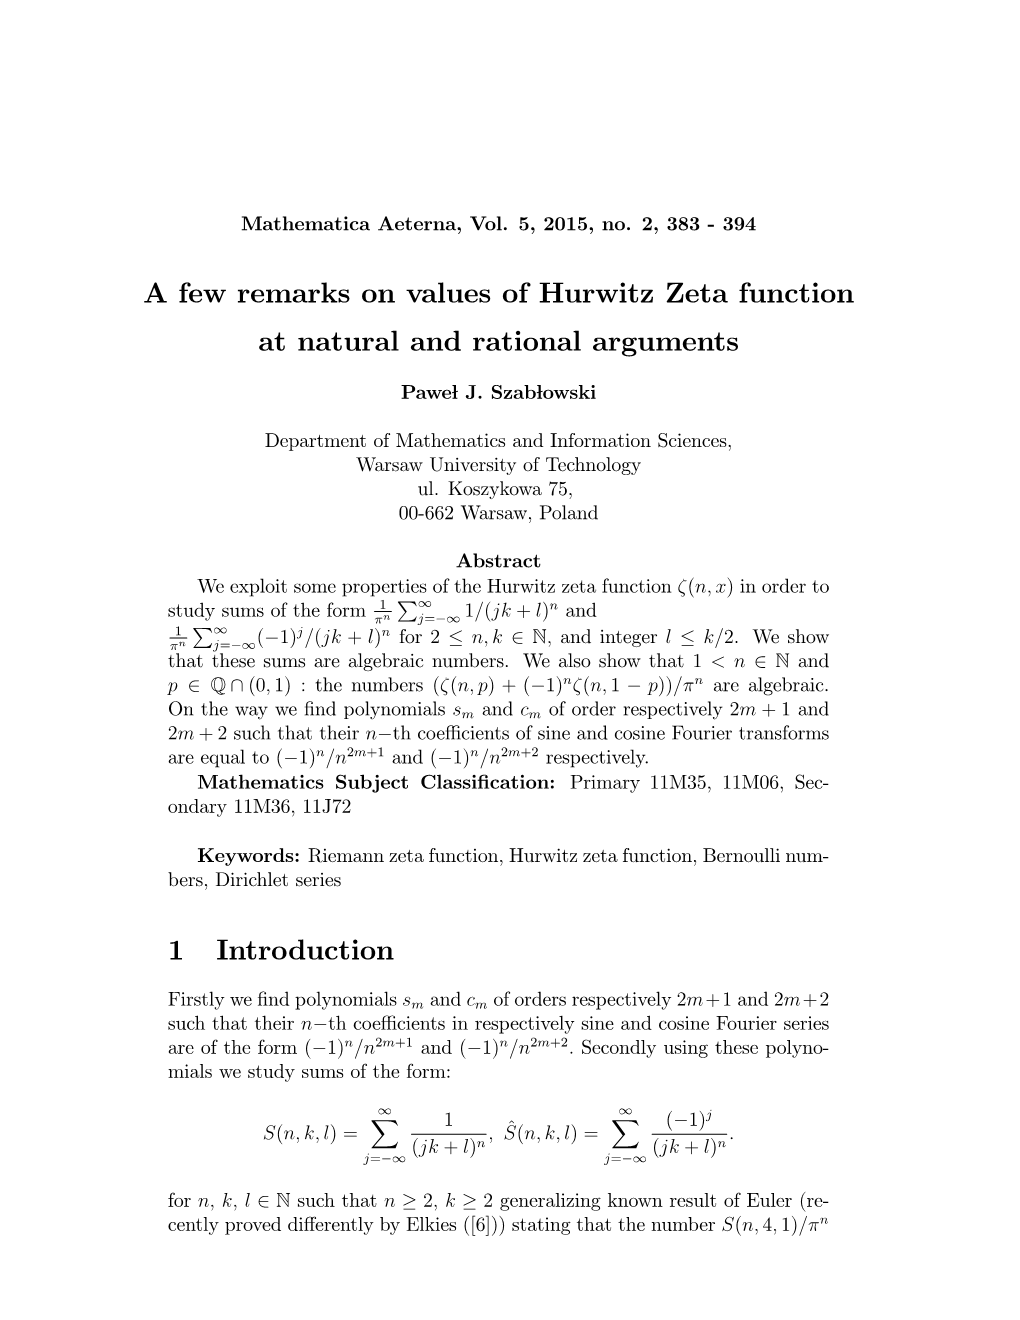 A Few Remarks on Values of Hurwitz Zeta Function at Natural and Rational Arguments